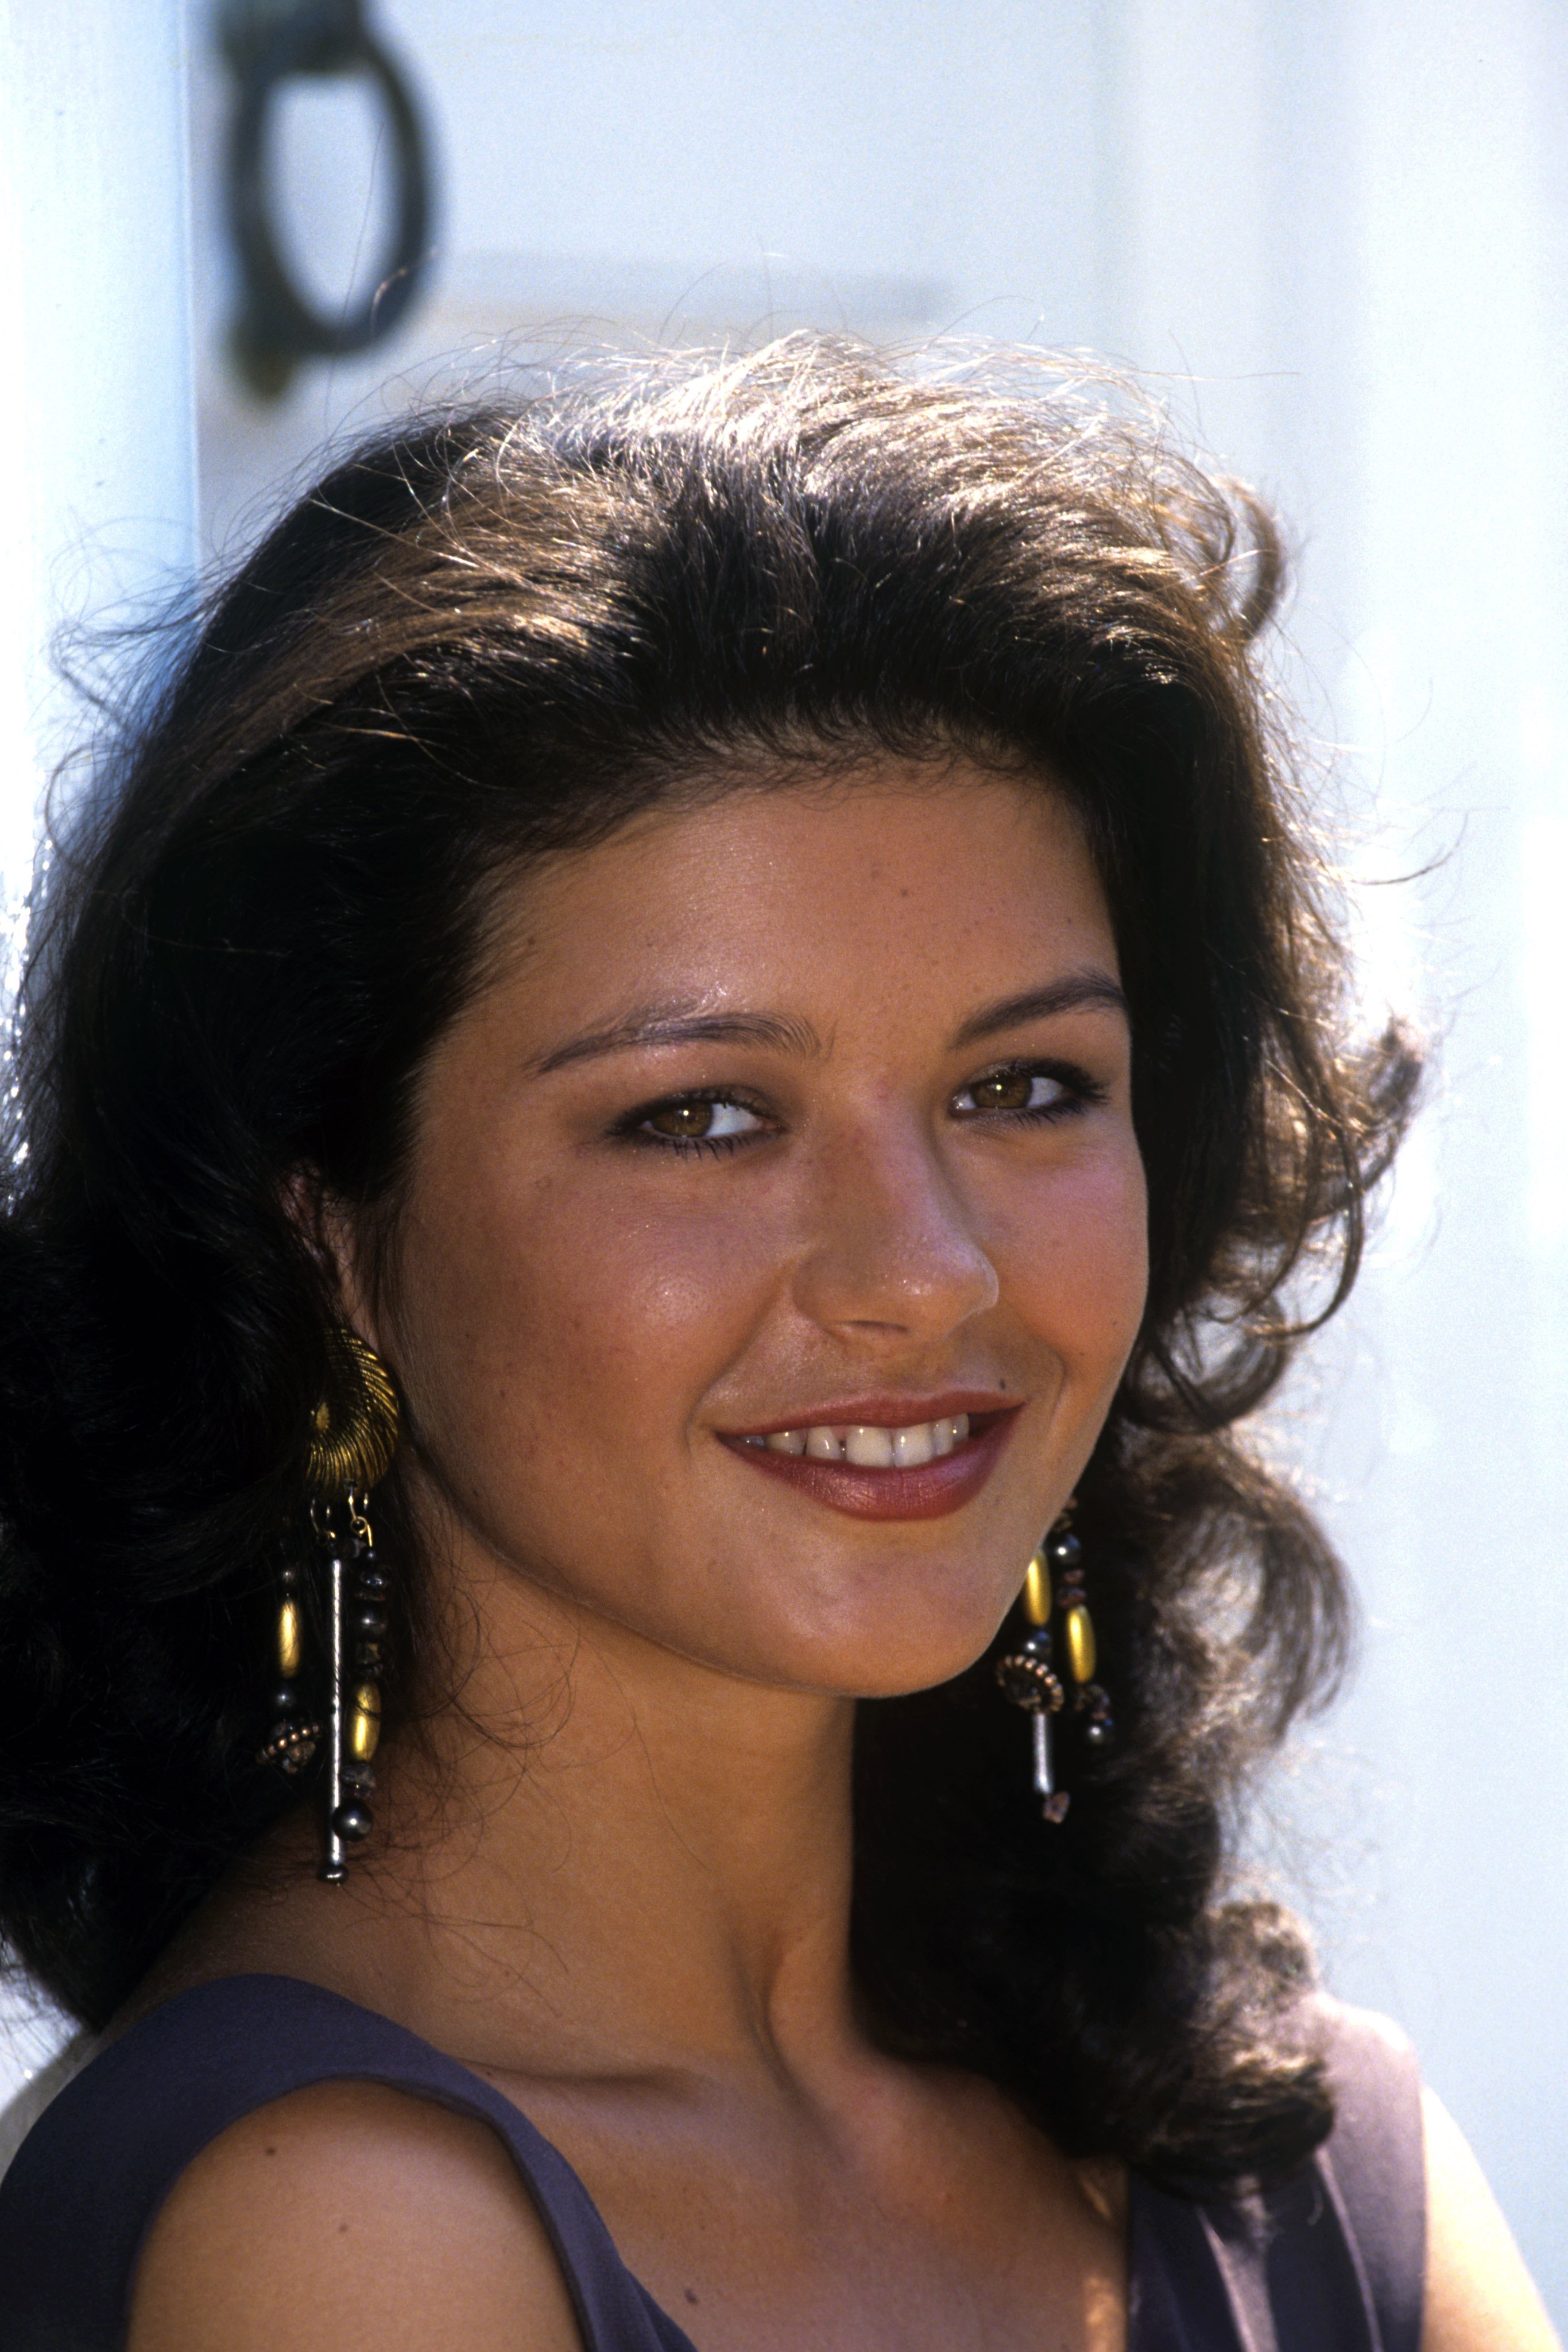 Catherine Zeta Jones at the launch of the BBC comedy drama "Out of the Blue" in which she starred, in London, England on 29th July, 1991 | Source: Getty Images 